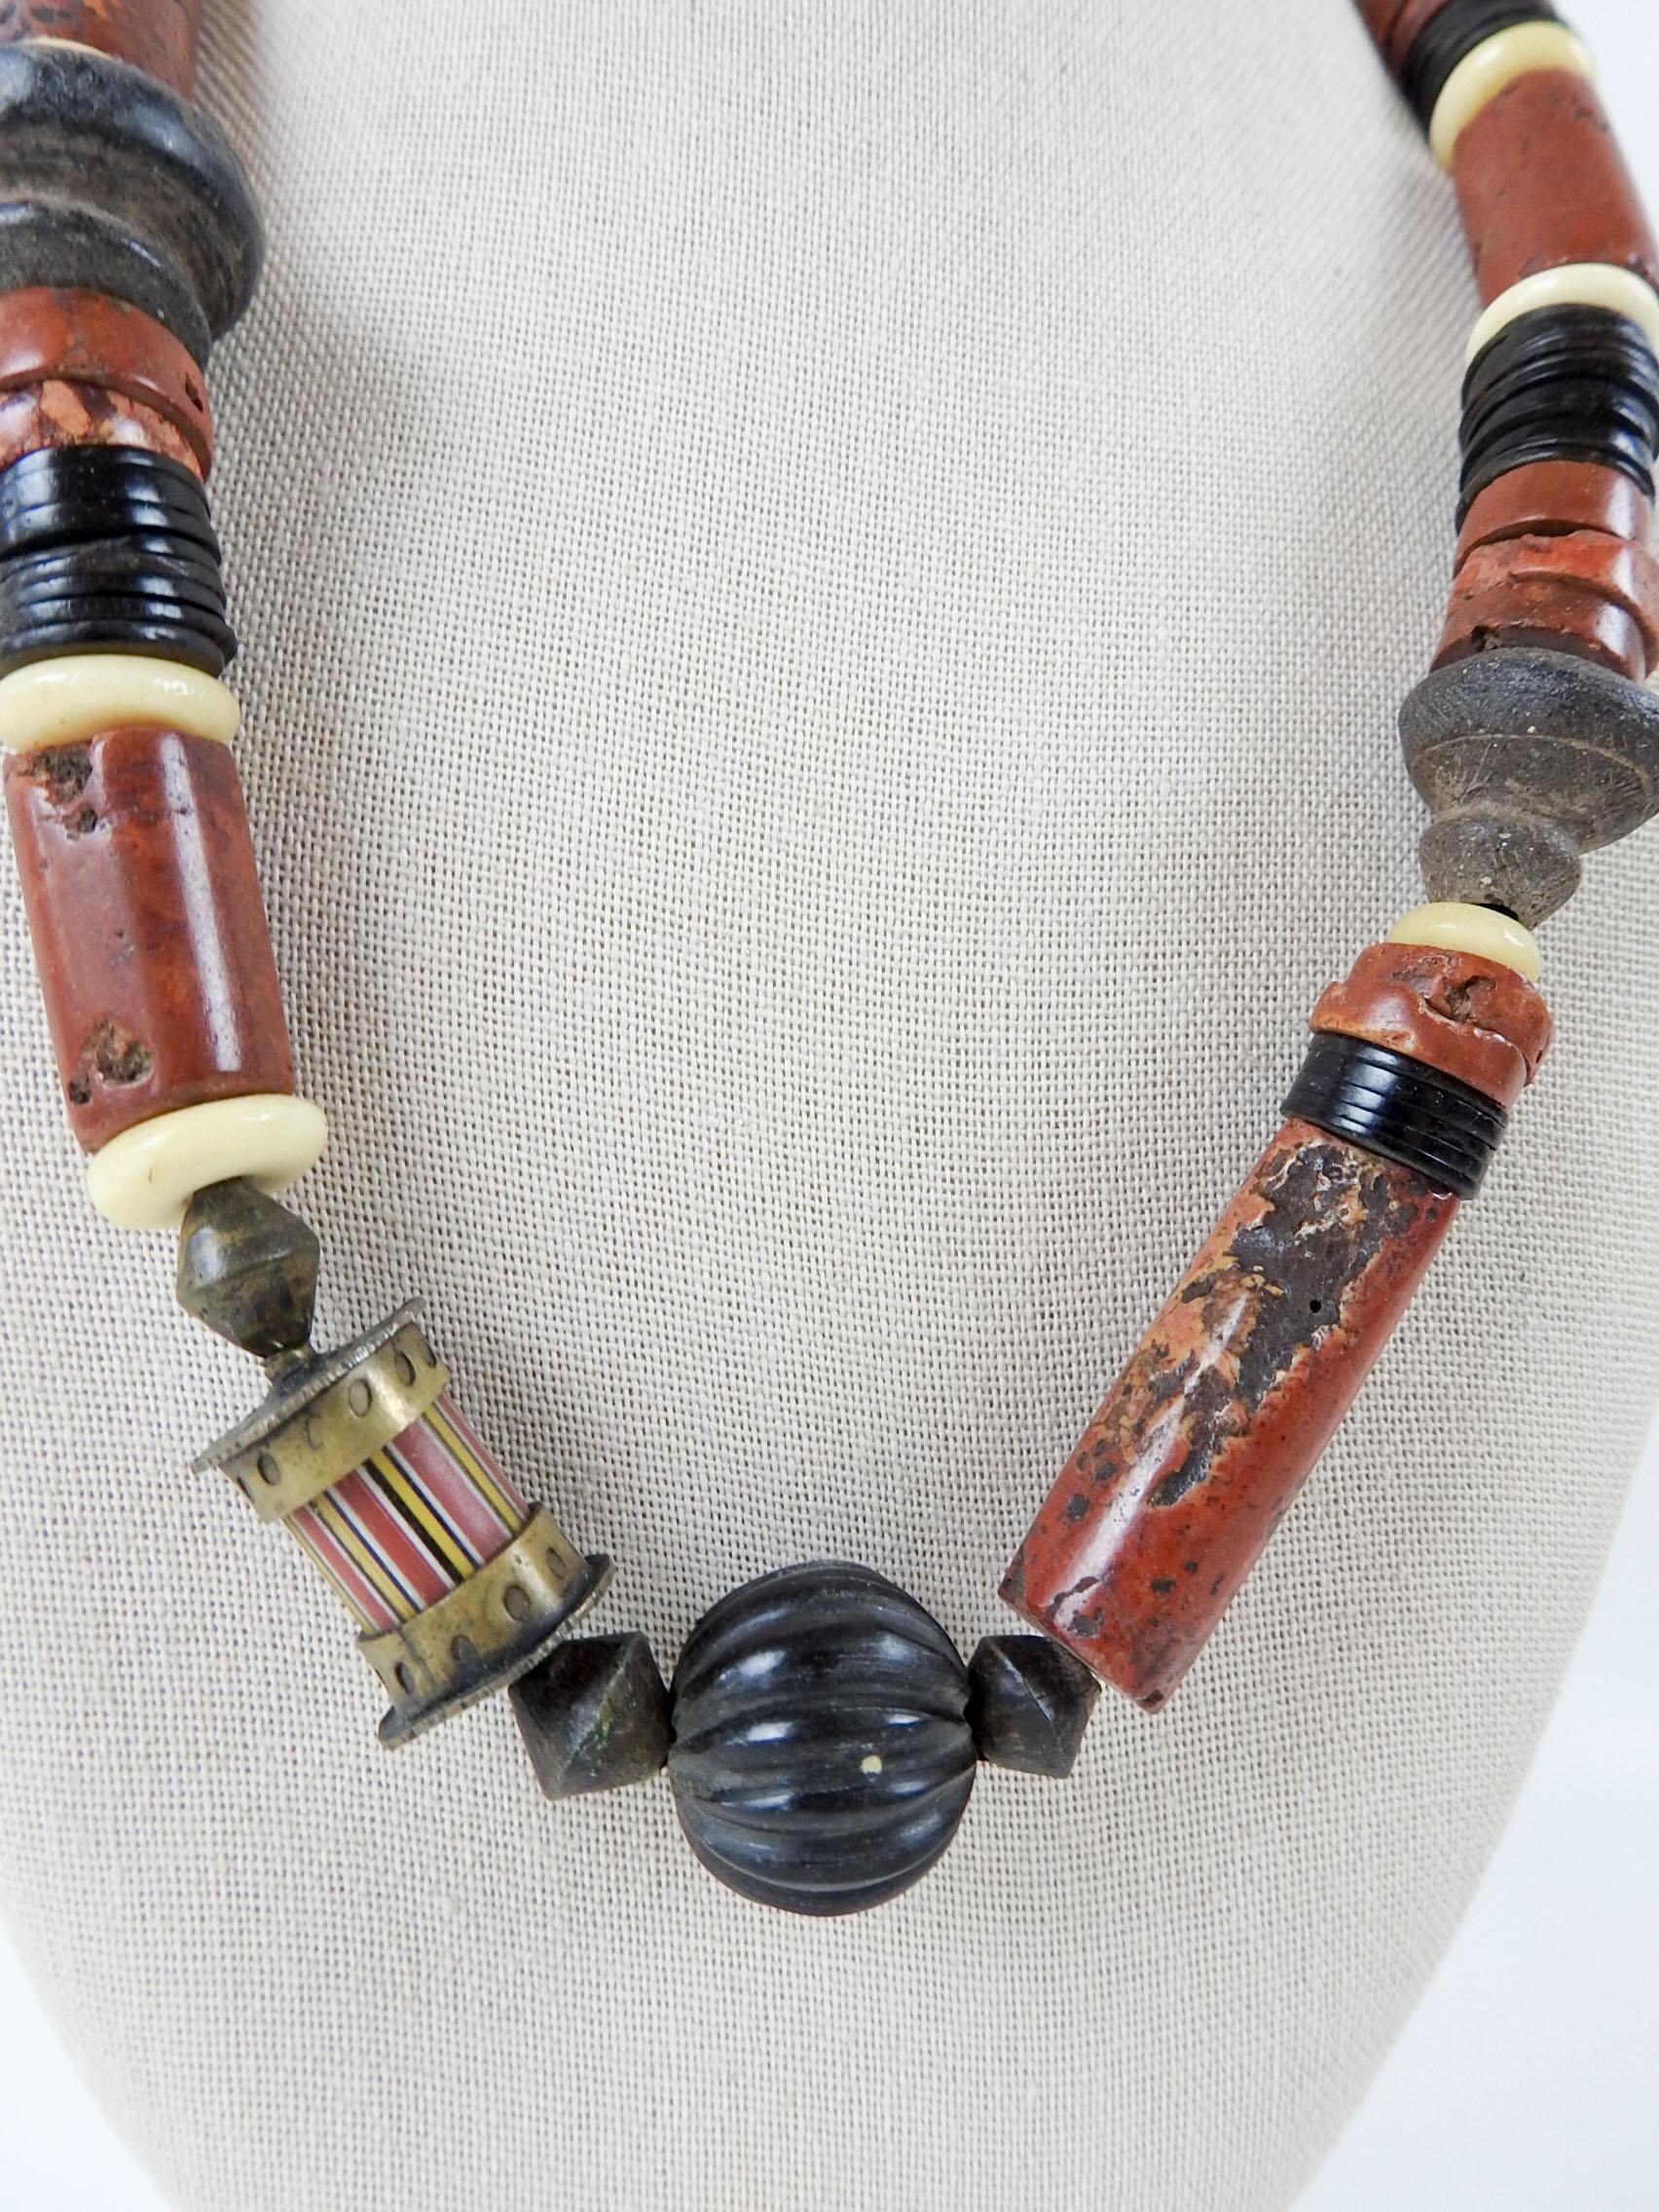 1990's Artist studio made beaded necklace using bauxite, cow horn, vintage pottery spindle whorls, glass trade beads, brass. By Linda Thompson (20th/21st century) Texas, 22